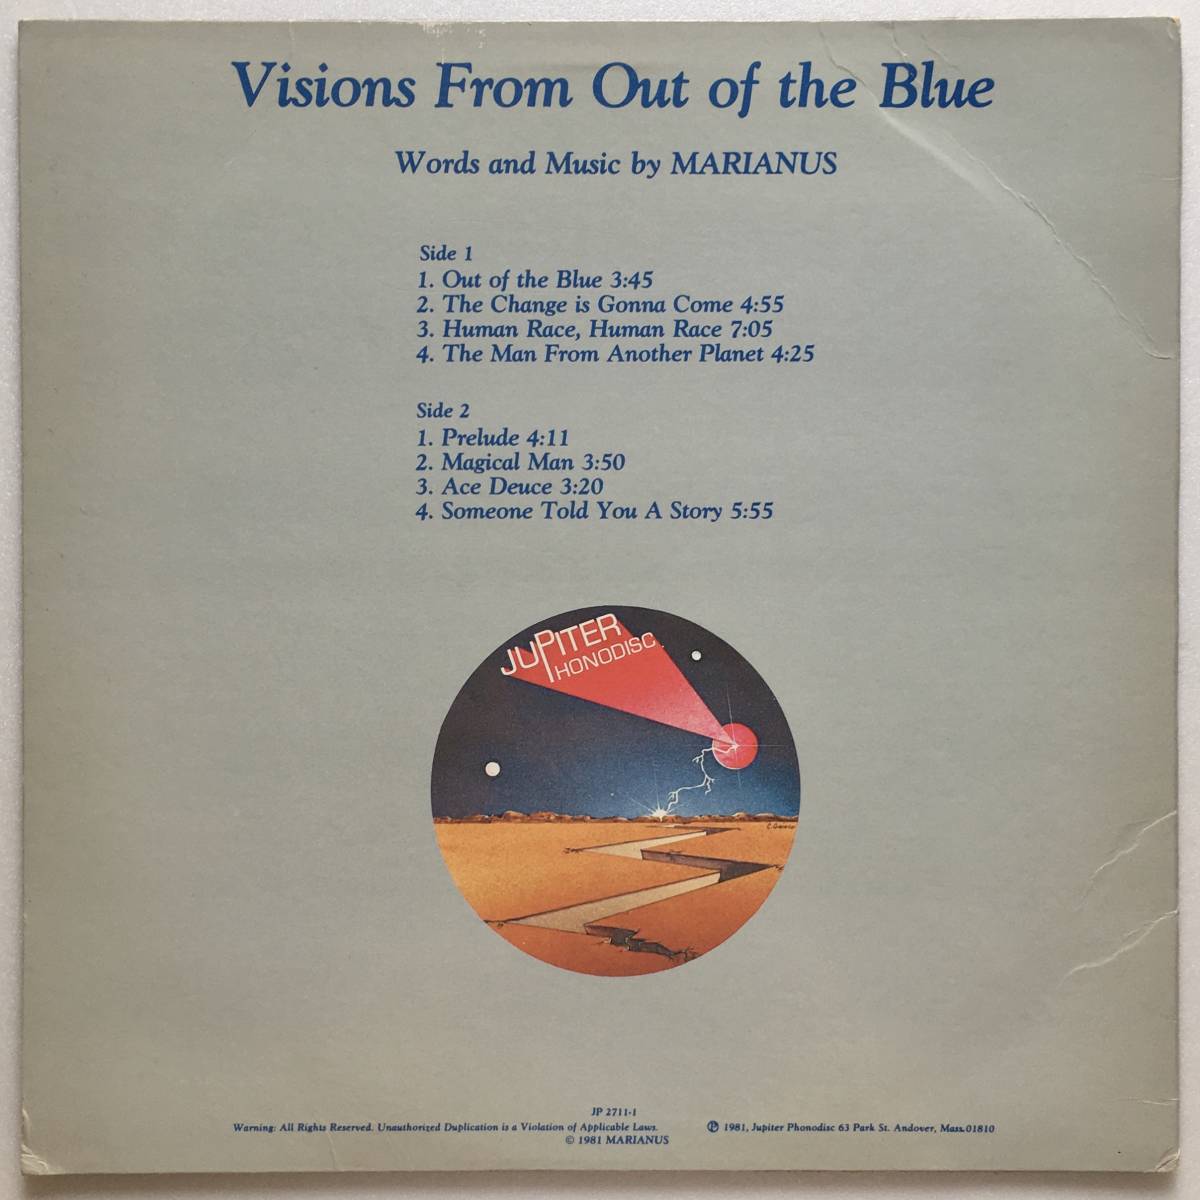 MARIANUS「VISIONS FROM OUT OF THE BLUE」US ORIGINAL JUPITER PHONODISC JP 2711-1 '81 RARE US PROGRESSIVE ROCK with INNER SLEEVE - 1